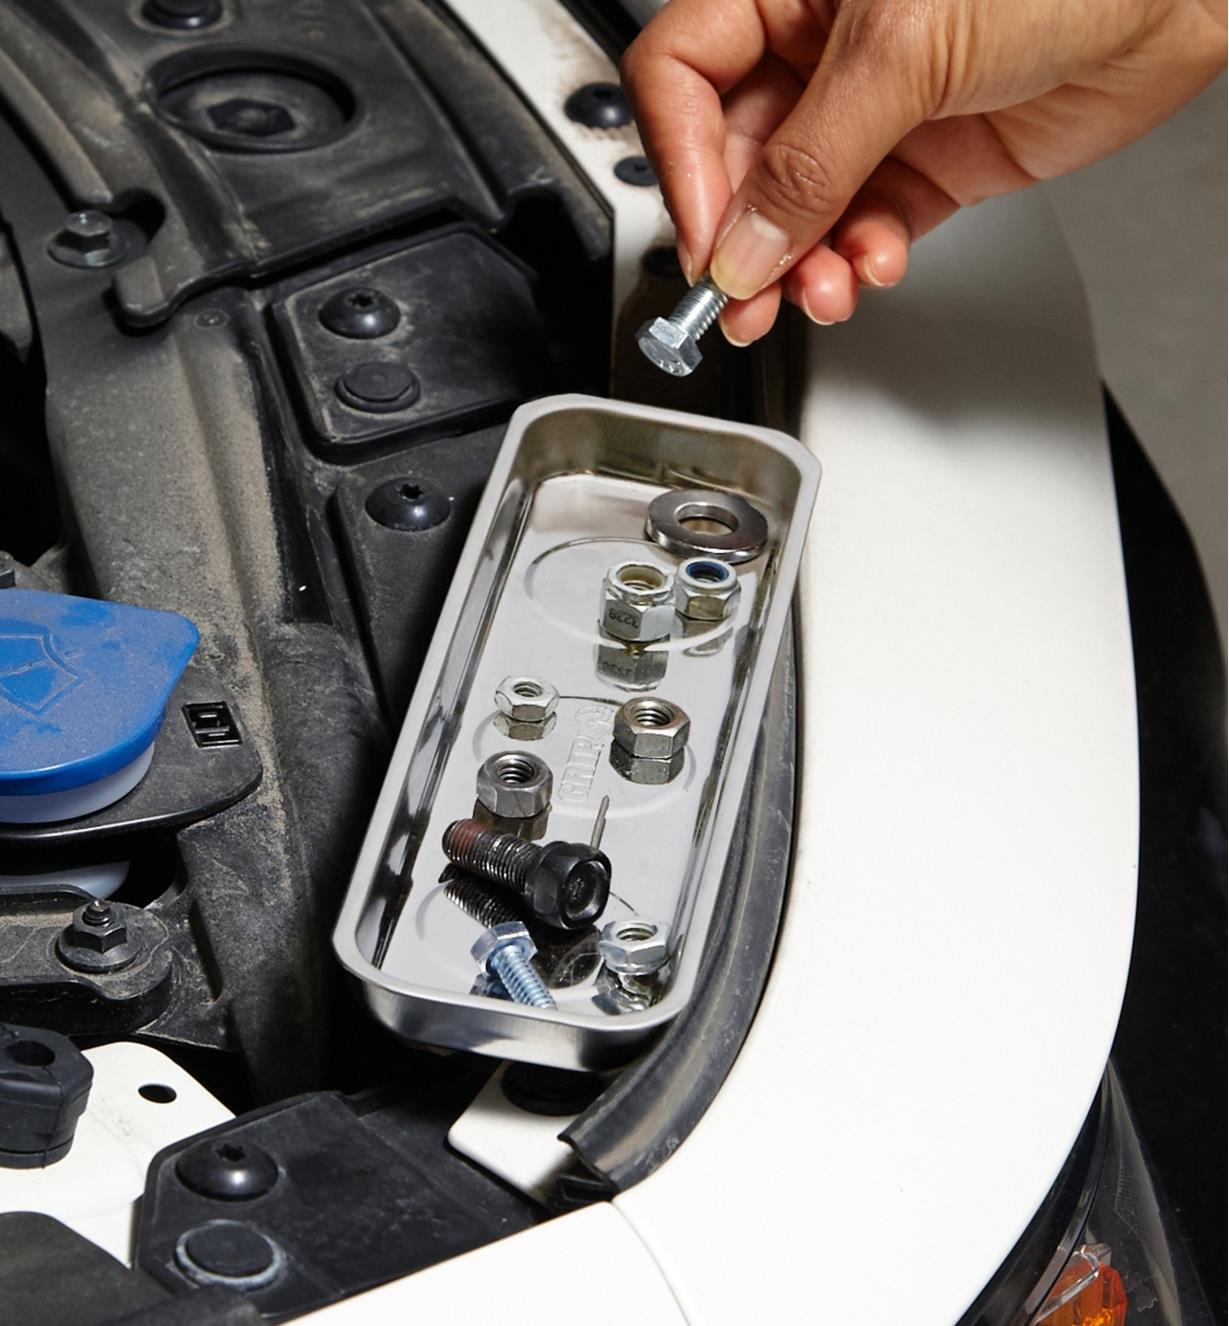 A magnetic parts tray is held against metal surfaces under a vehicle hood